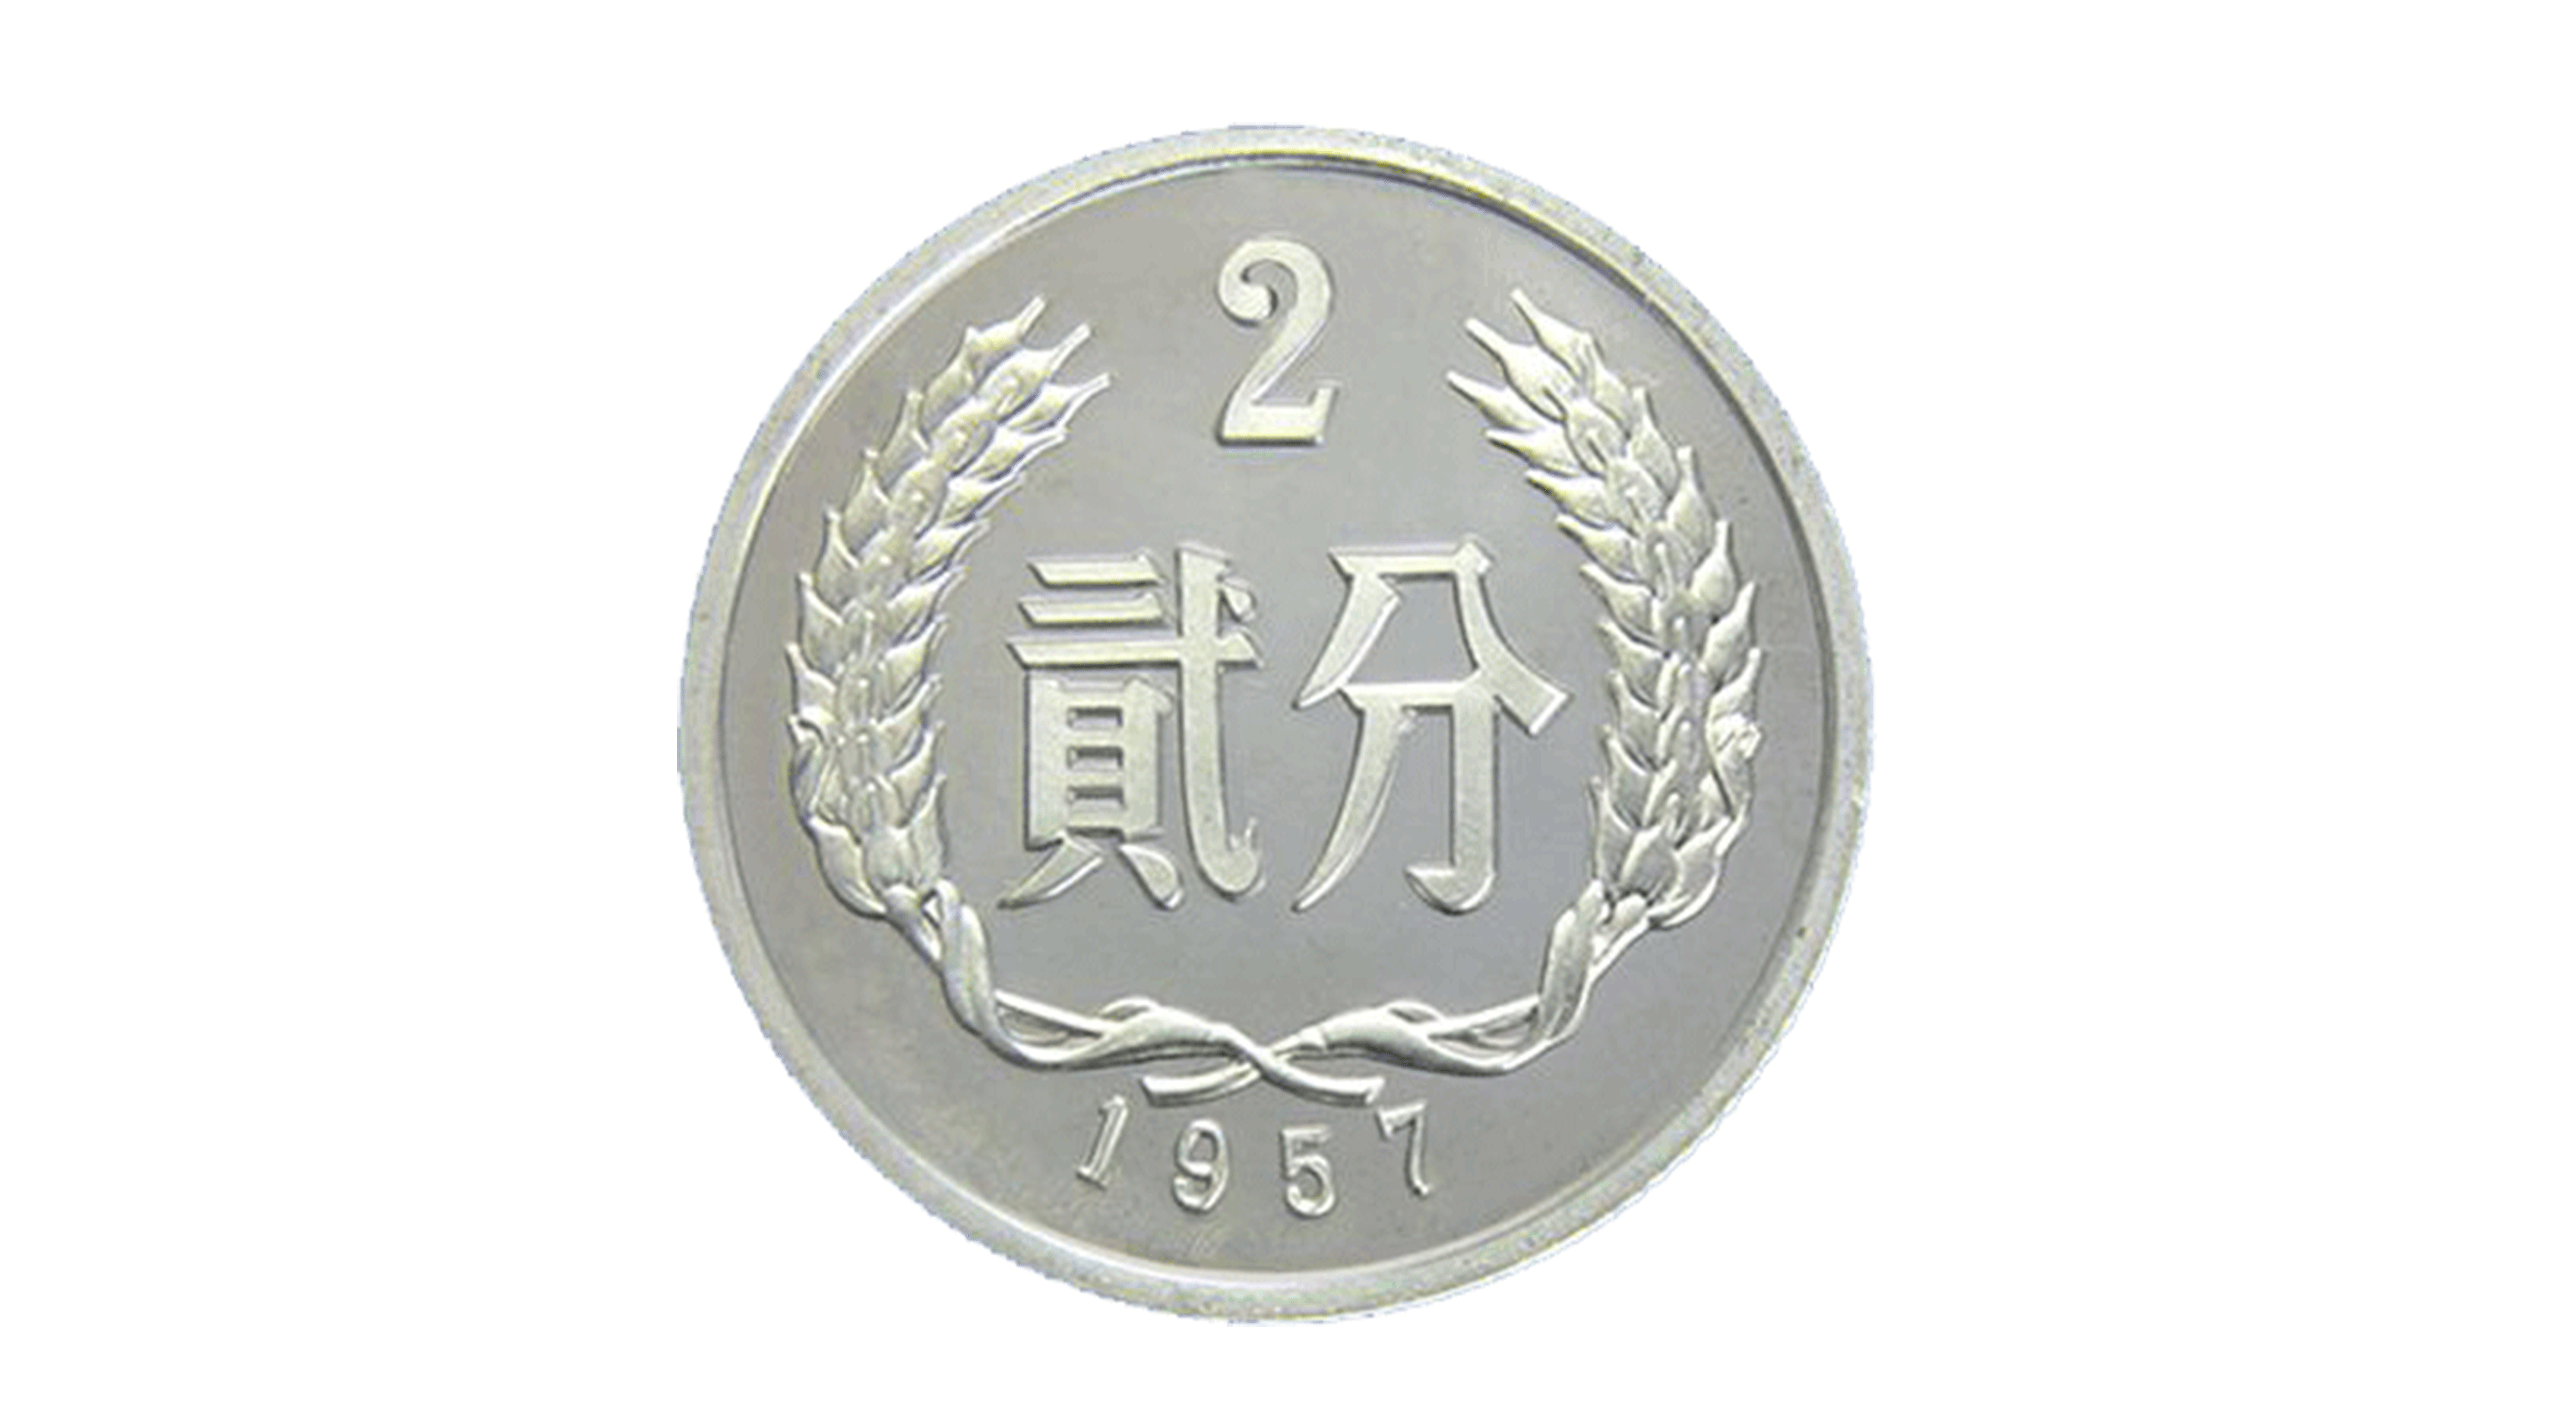 Two-fen (2 cents) coin 1957-12-1